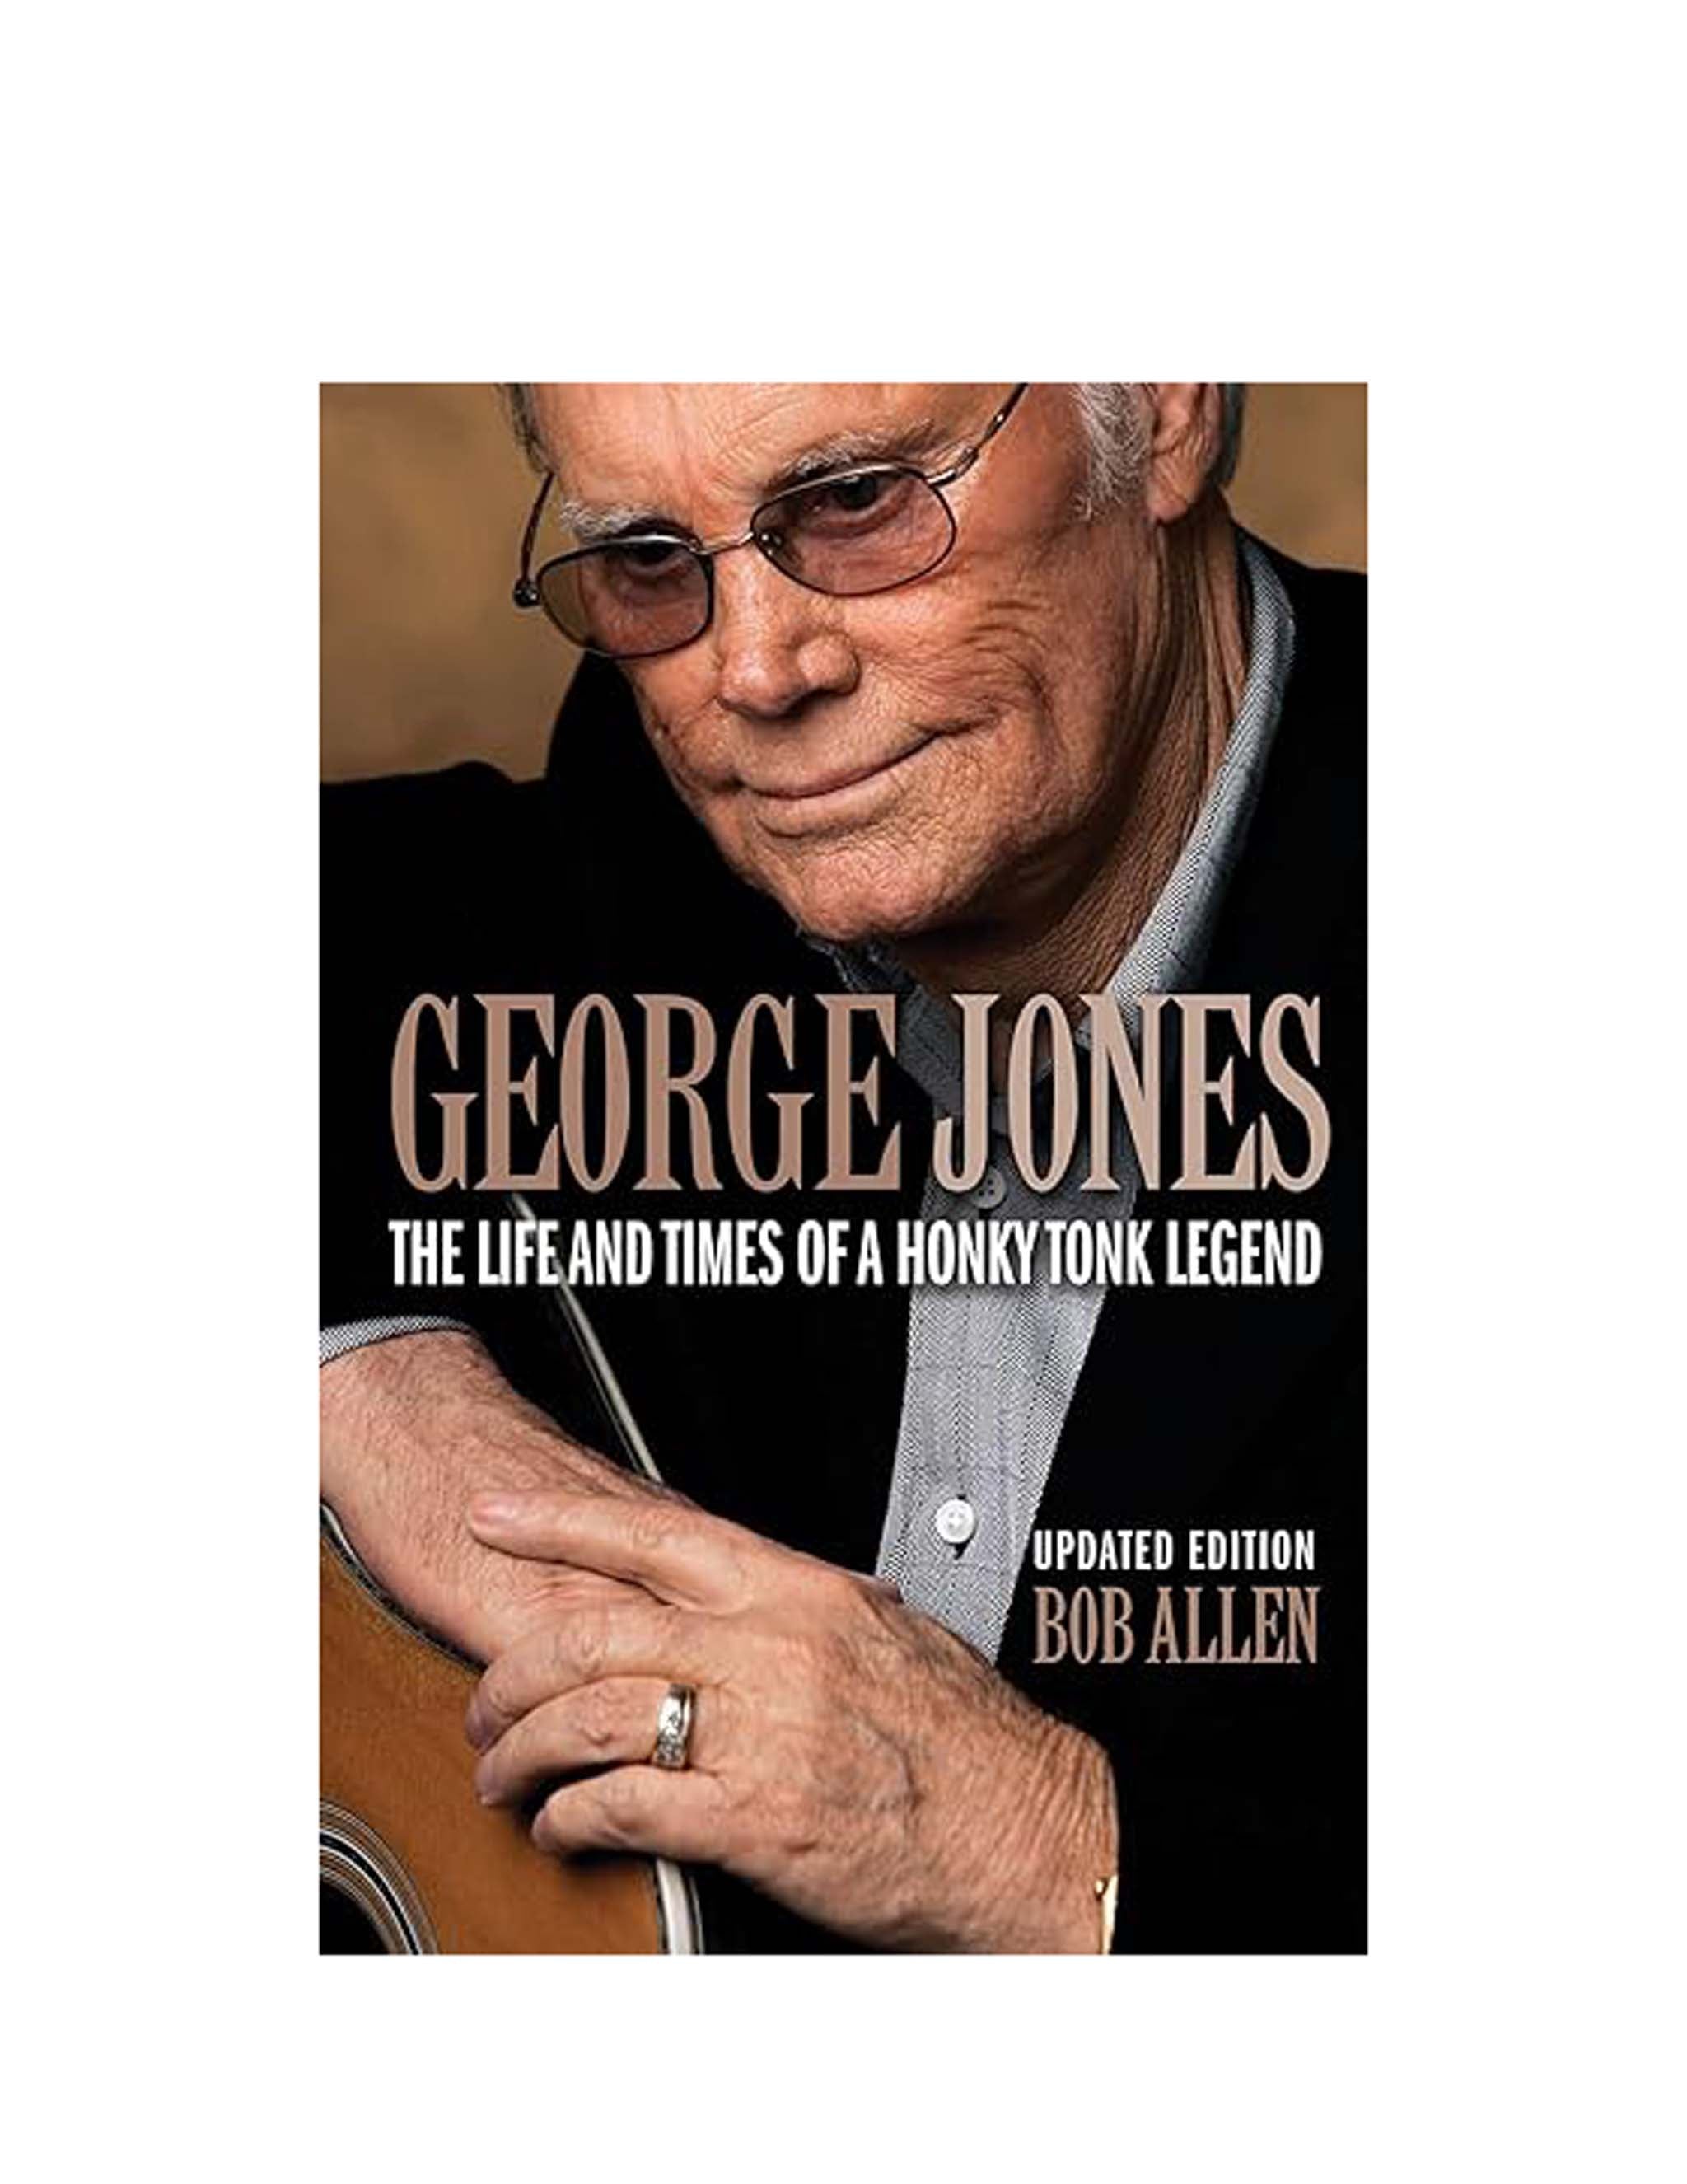 George Jones: The Life and Times of a Honky Tonk Legend (Paperback)